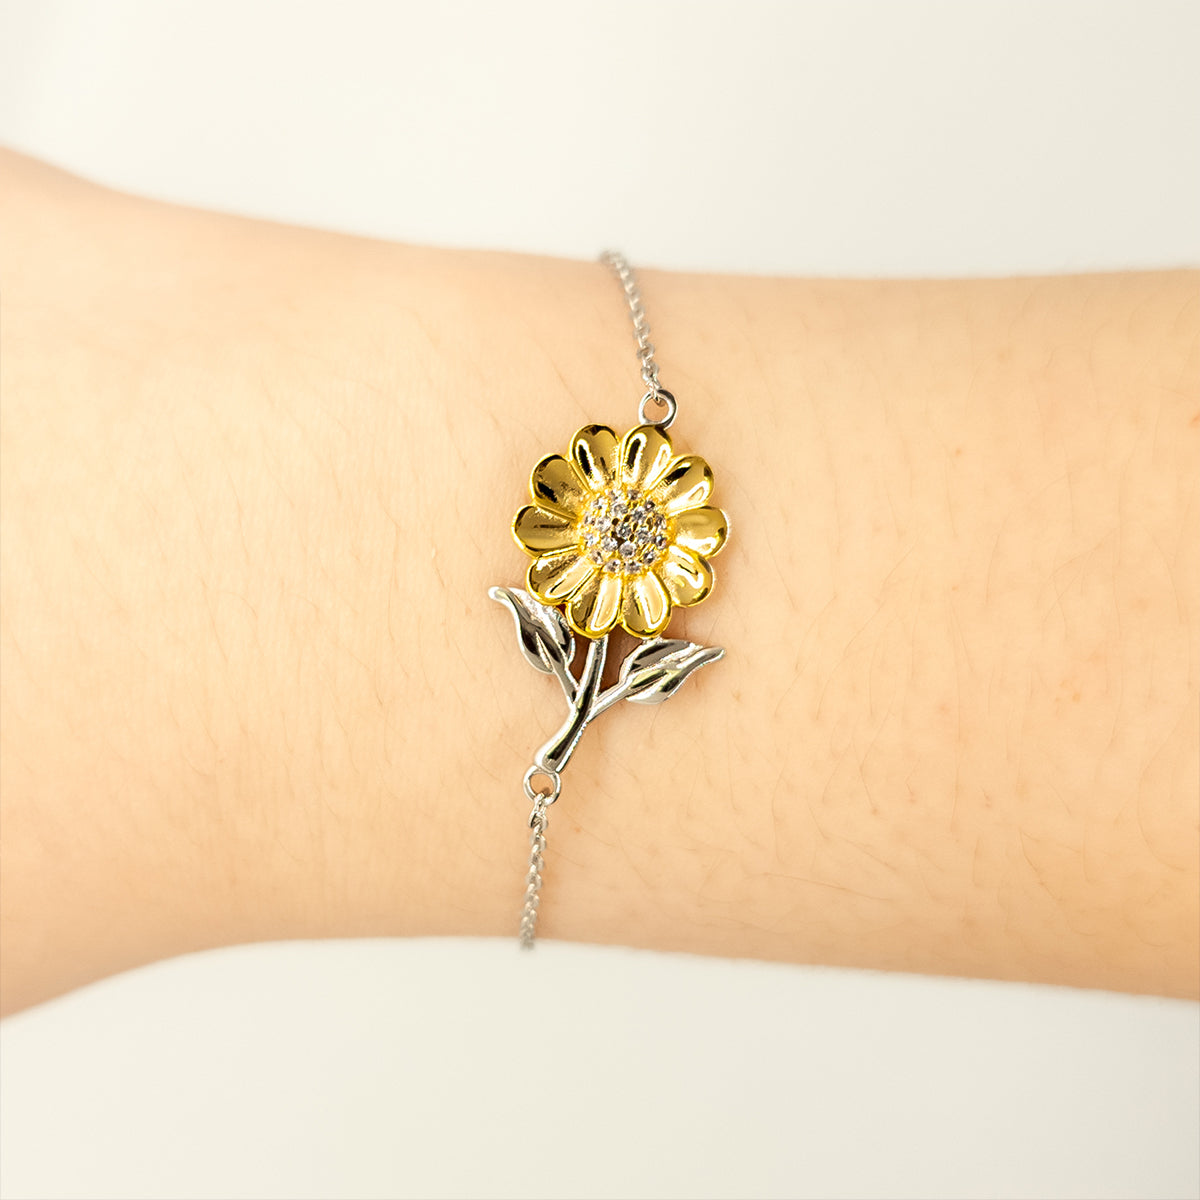 Granny Sunflower Bracelet - Engraved Gift for Grandma, Inspirational Jewelry with Special Meaning, Mothers Day, Christmas, Birthday Present for Her